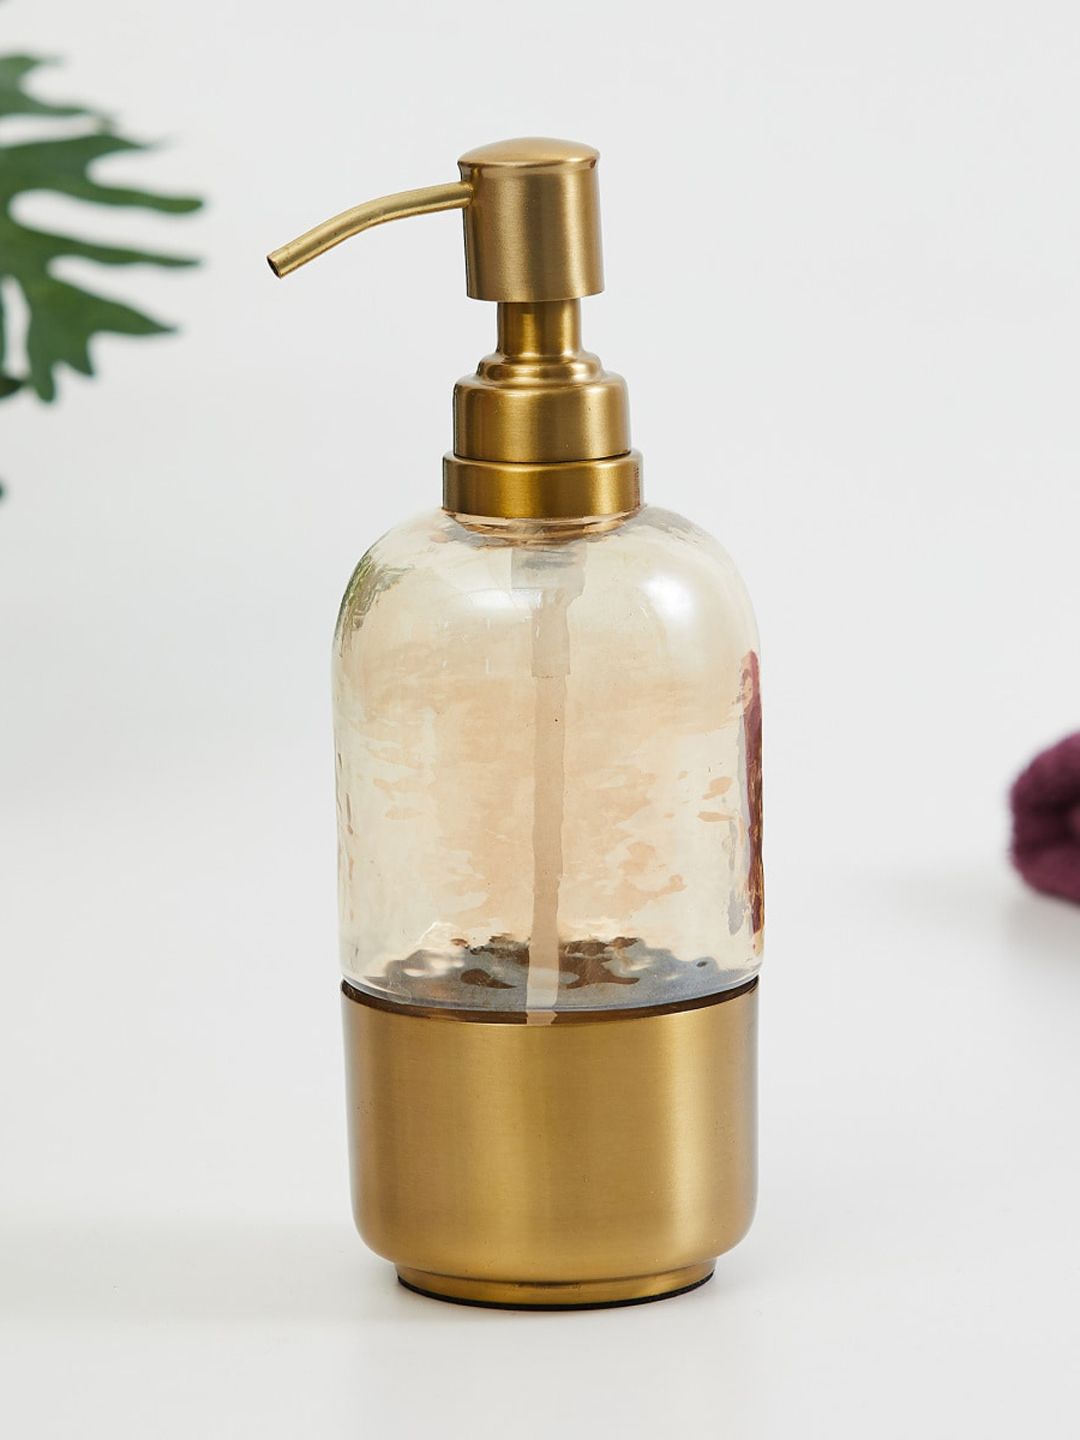 Home Centre Gold-Toned Solid Freestanding Soap Dispenser Price in India